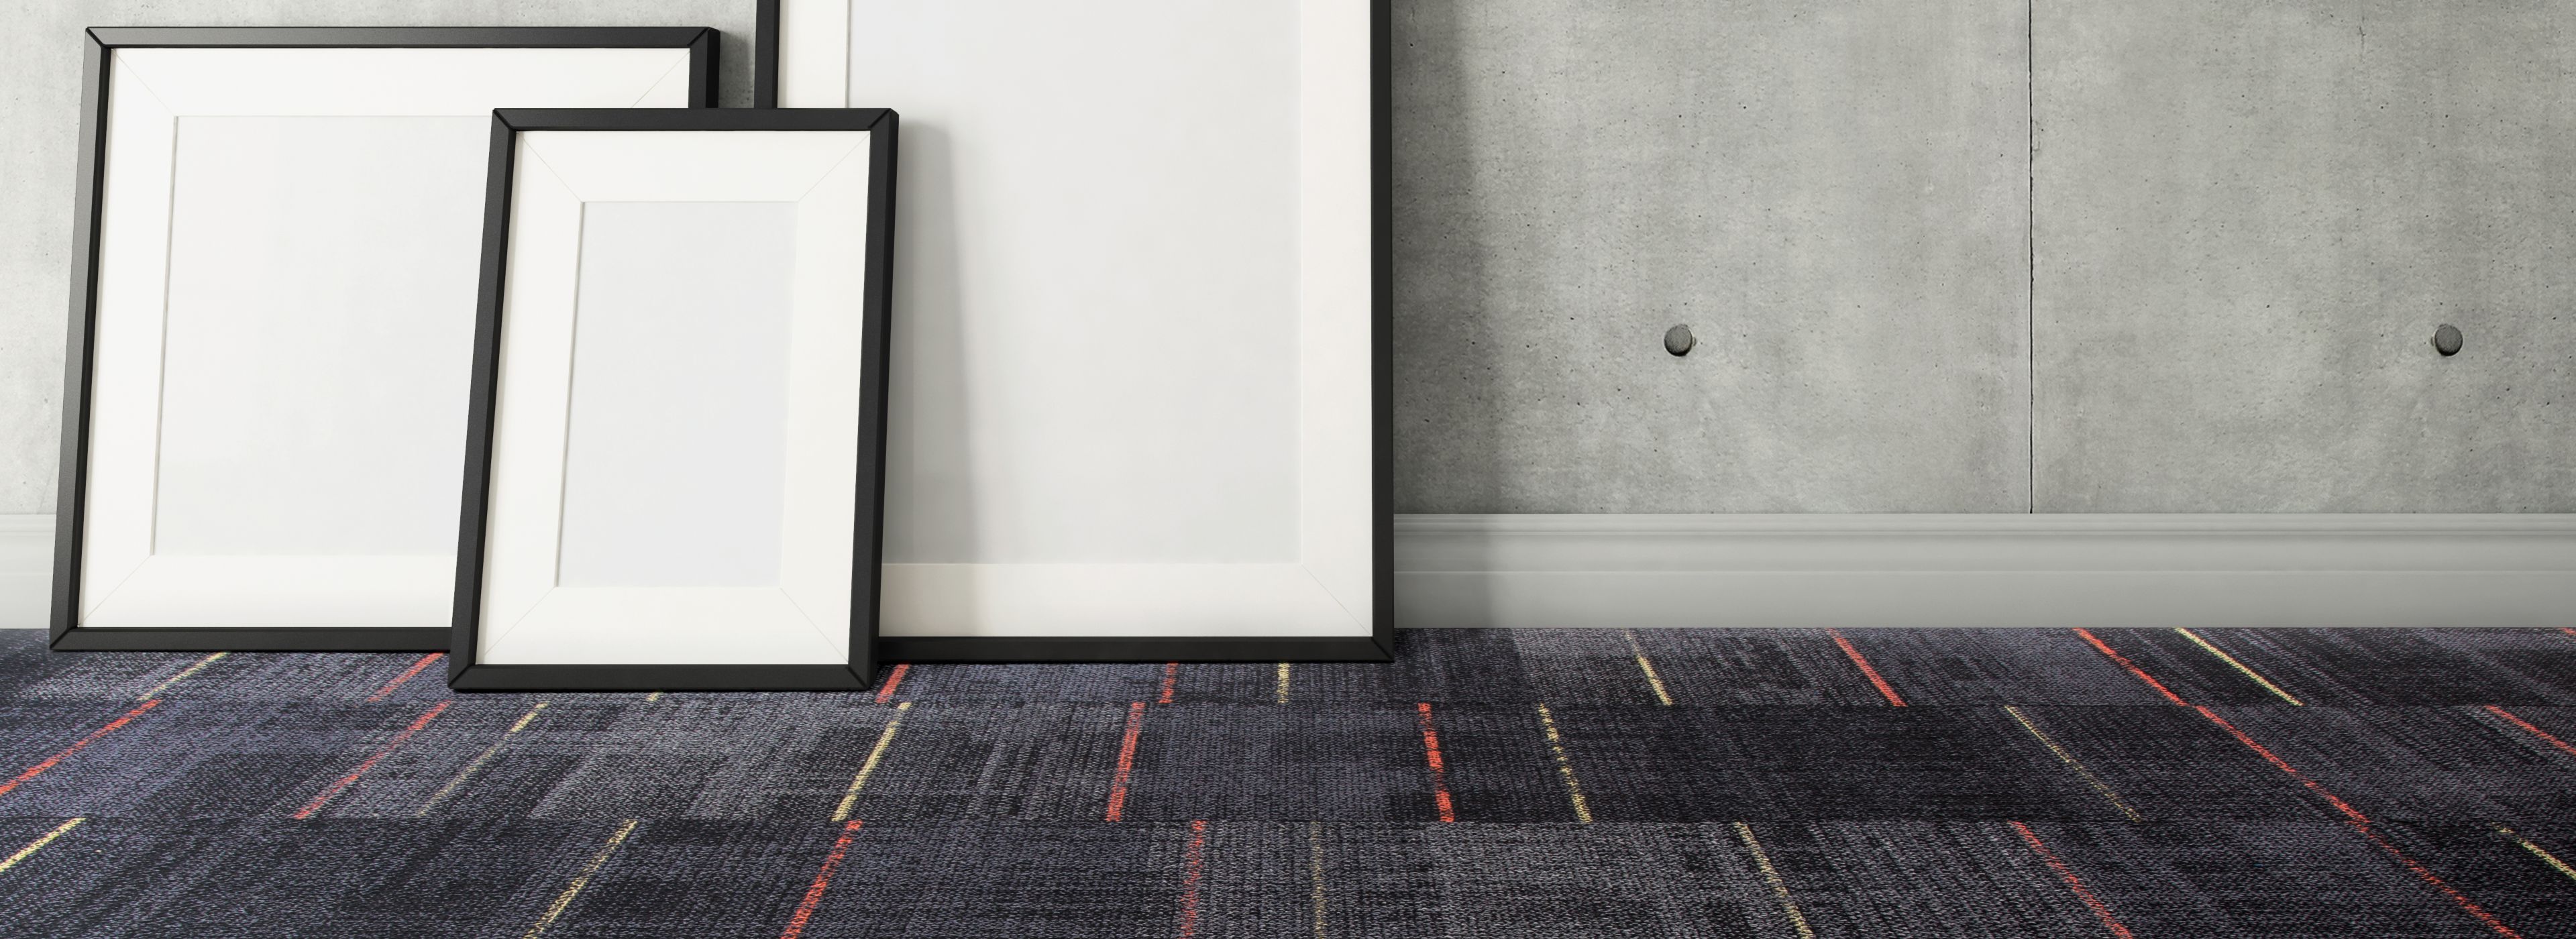 Interface AE312 carpet tile in open room with blank canvases against wall imagen número 1